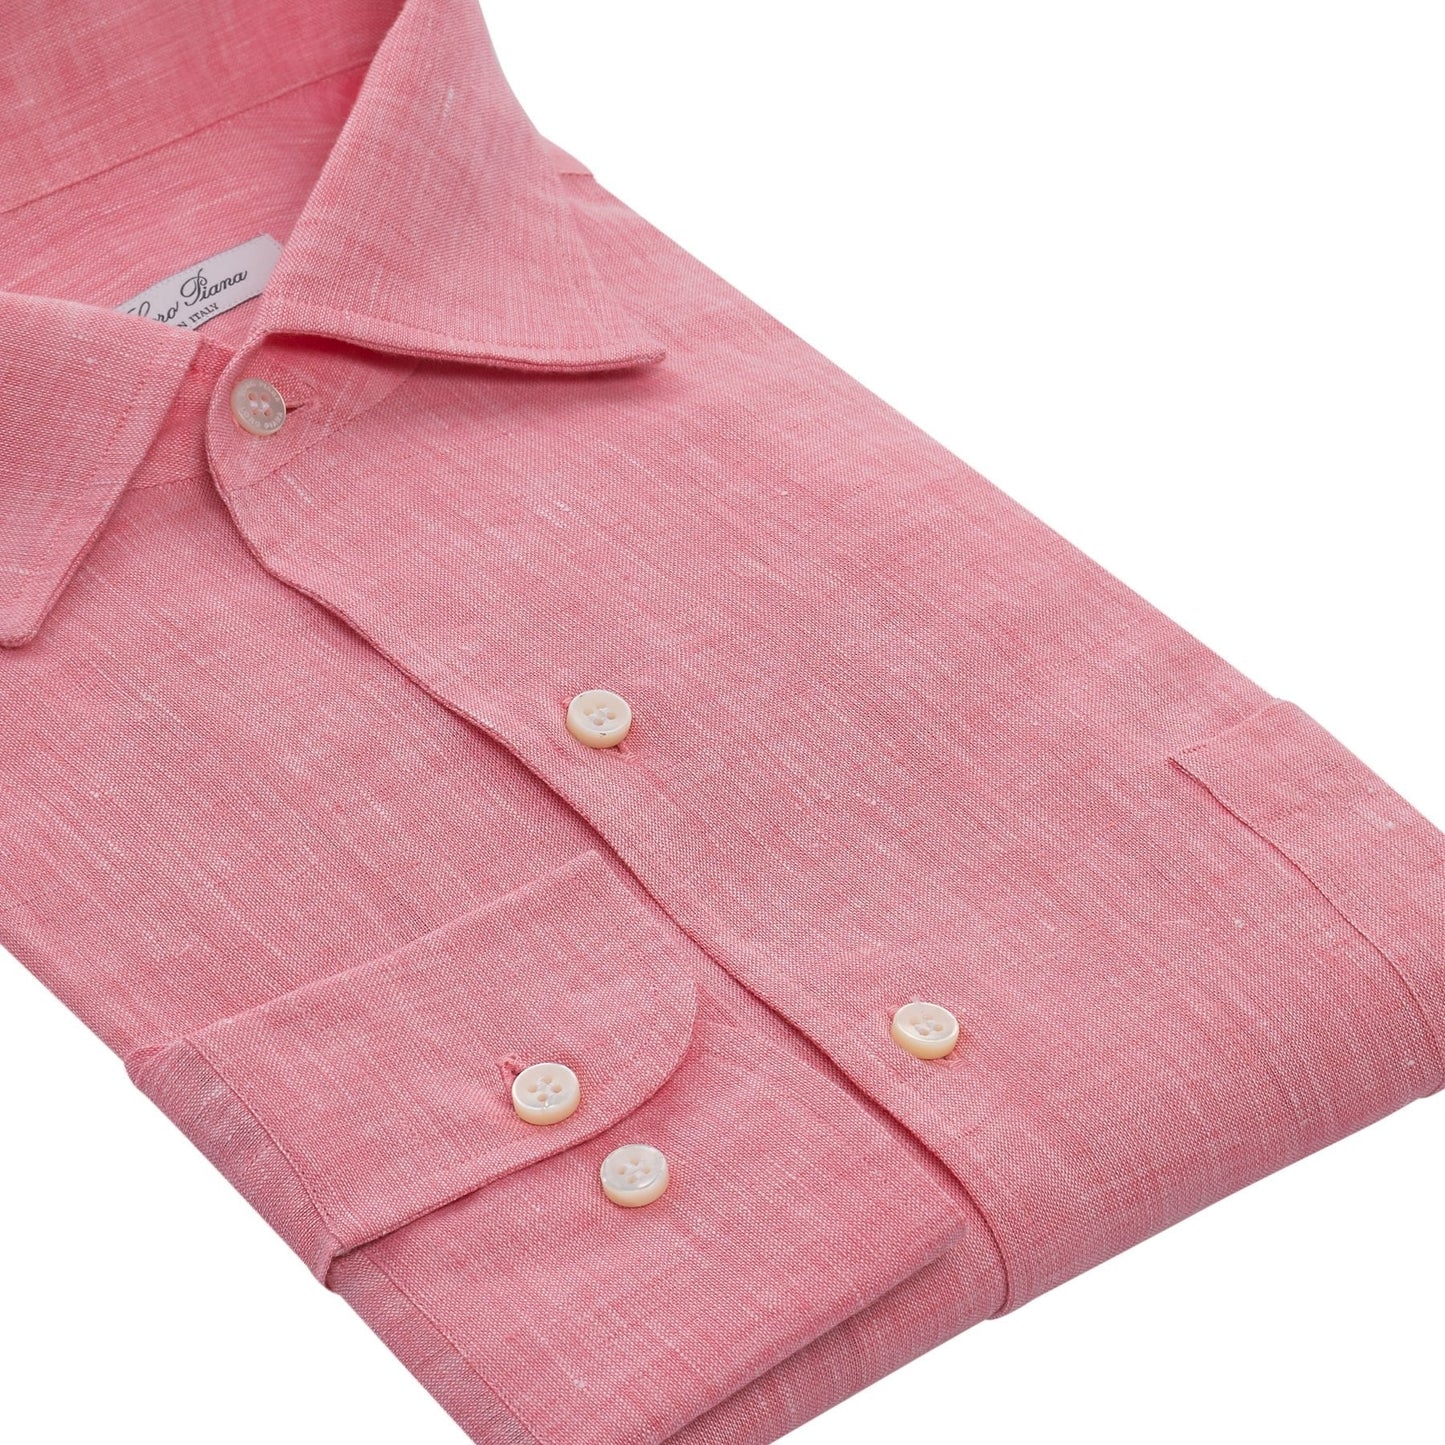 Loro Piana Linen Shirt with Chest Pocket in Pink - SARTALE